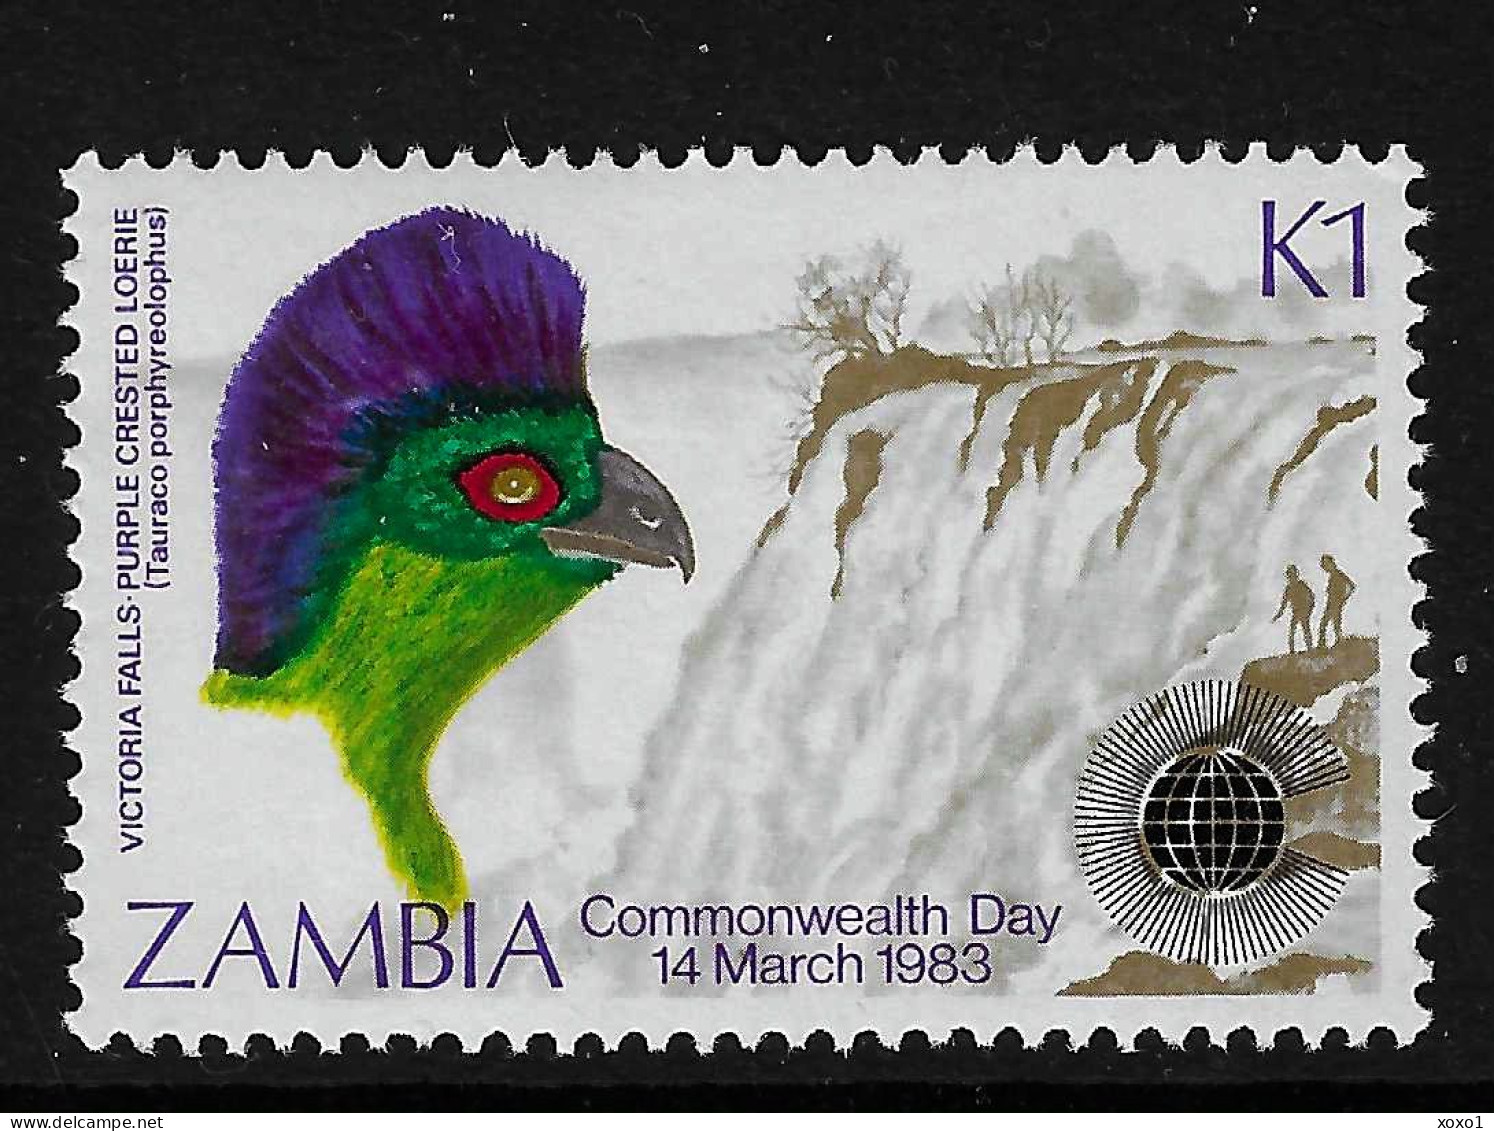 ZAMBIA 1983 MiNr. 289 Sambia Birds Purple-crested Turaco, Victoria Falls 1v MNH** 4,00 € - Coucous, Touracos